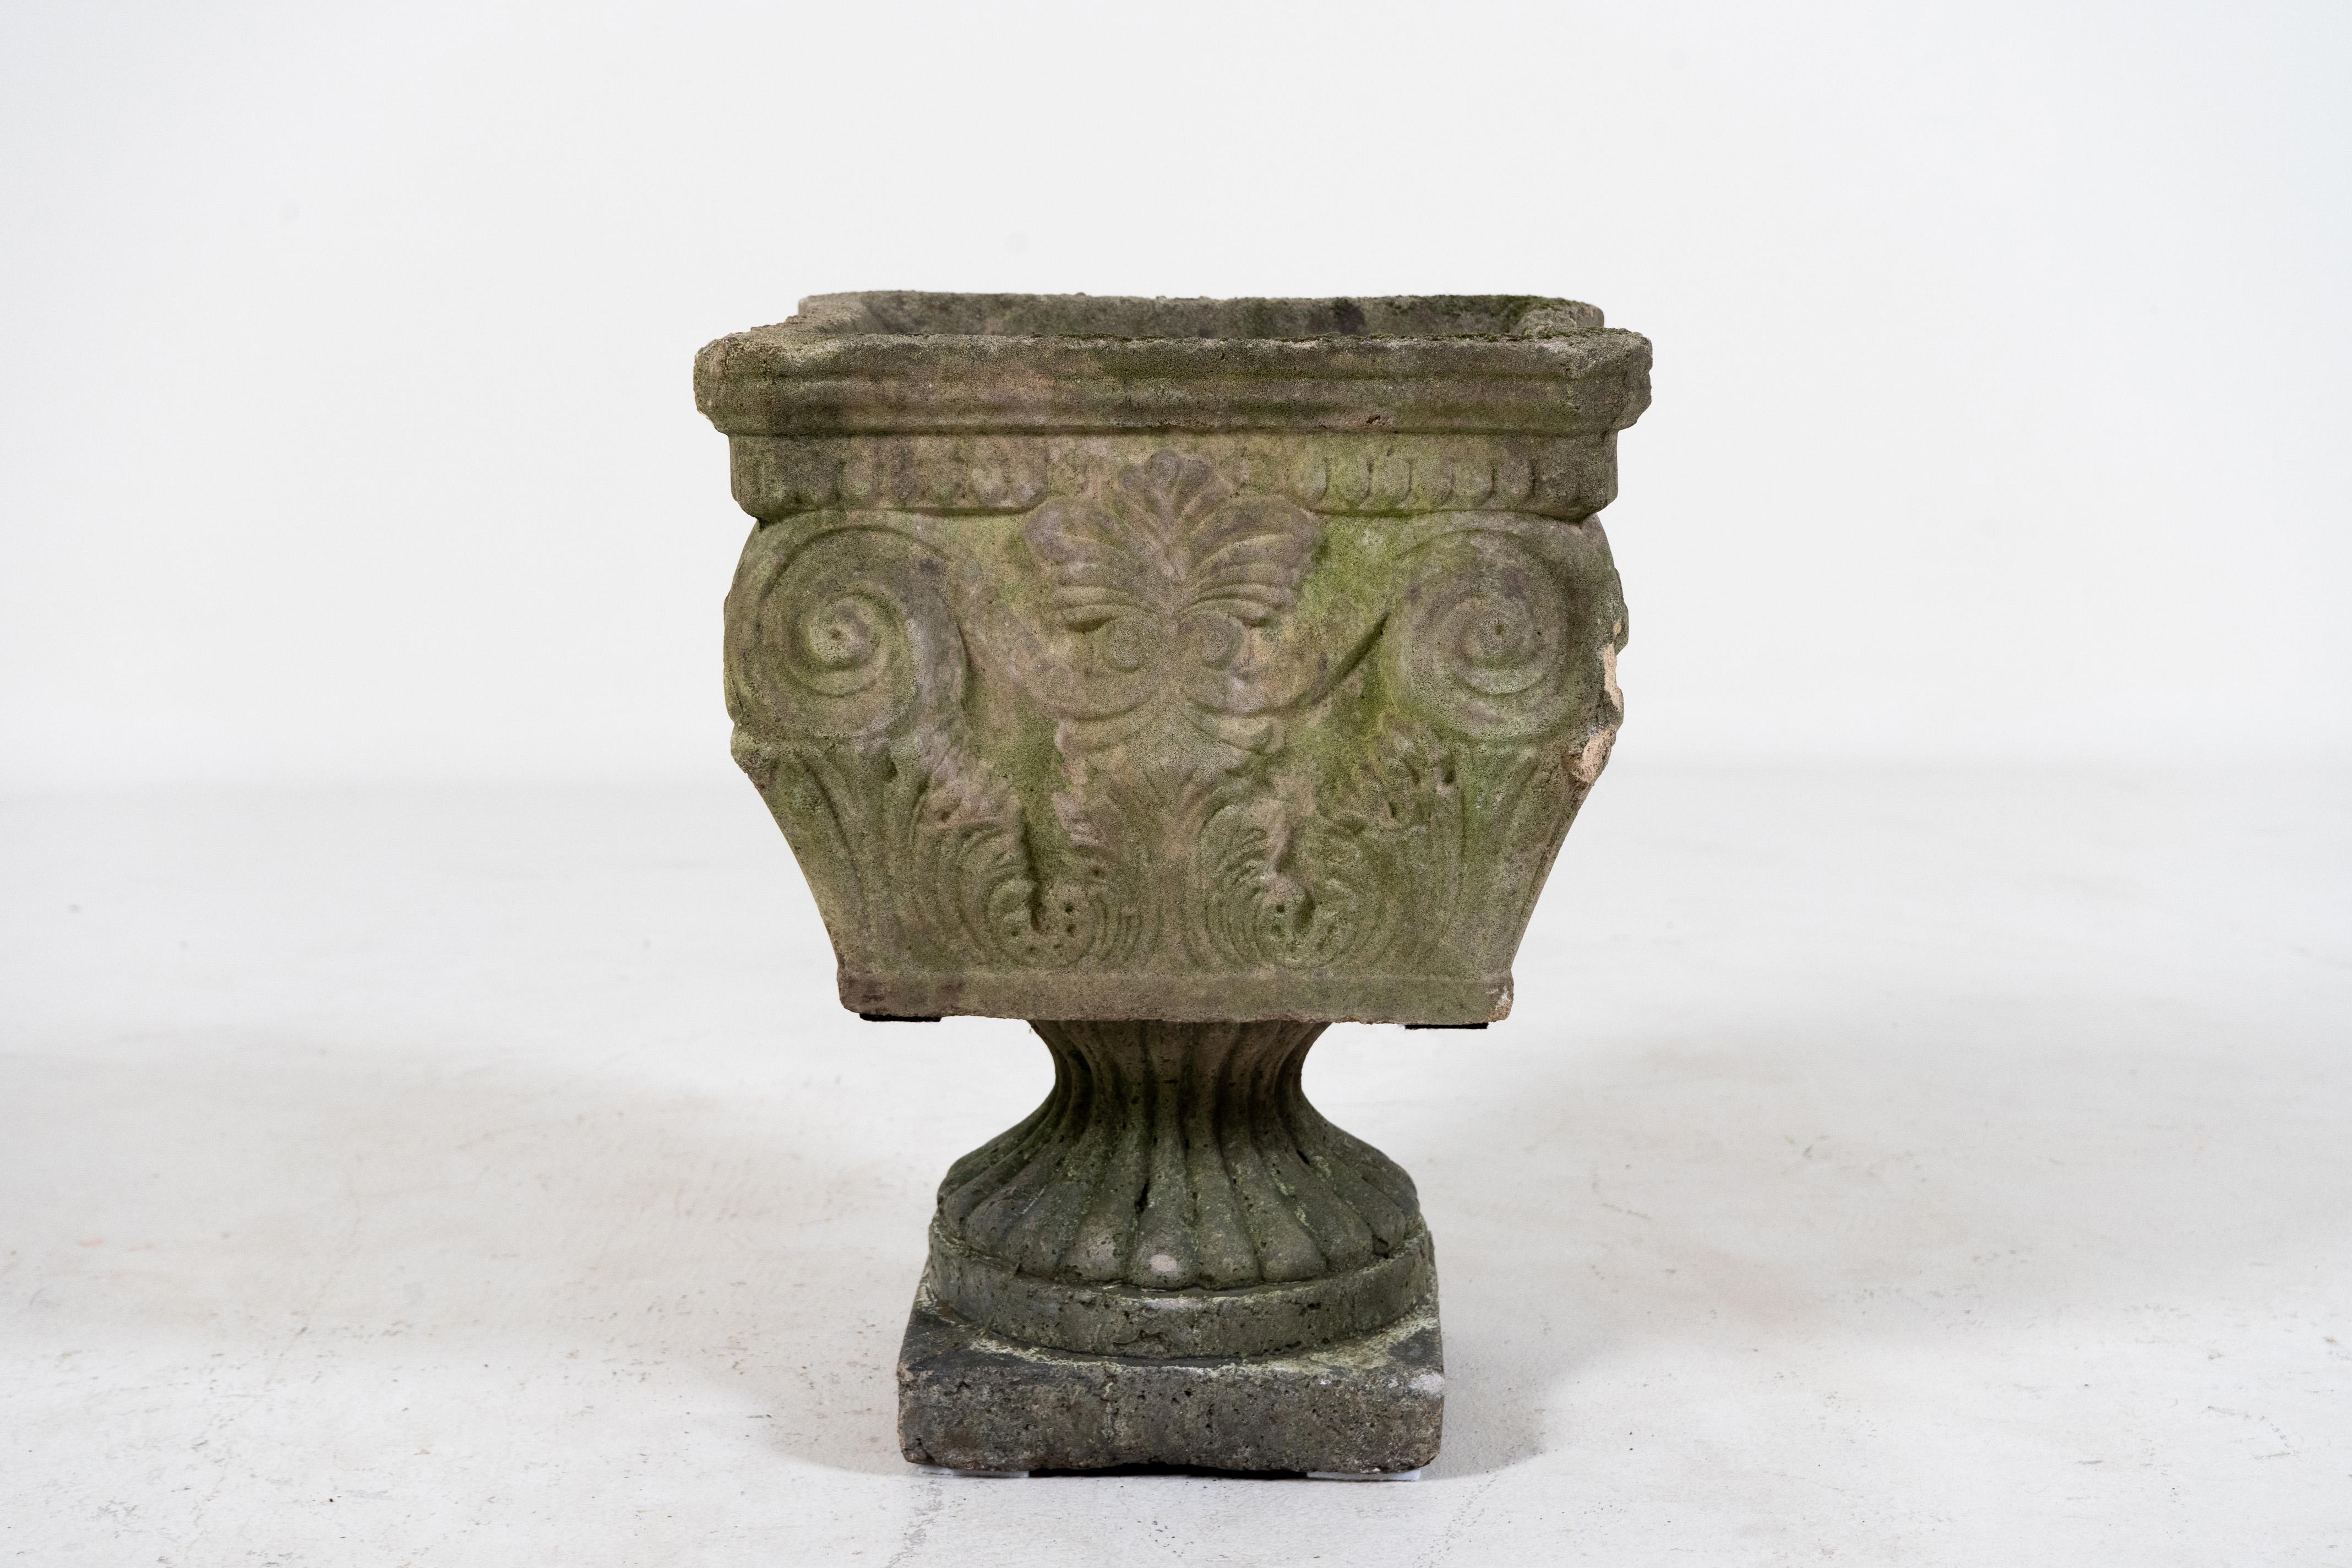 This vintage French jardinière has a playfully idiosyncratic appearance. It is squarish in form, loosely based on a Greek column capital. Ionic scrolling and acanthus leaf motifs are clearly visible. The basin rises above a lobed base and square